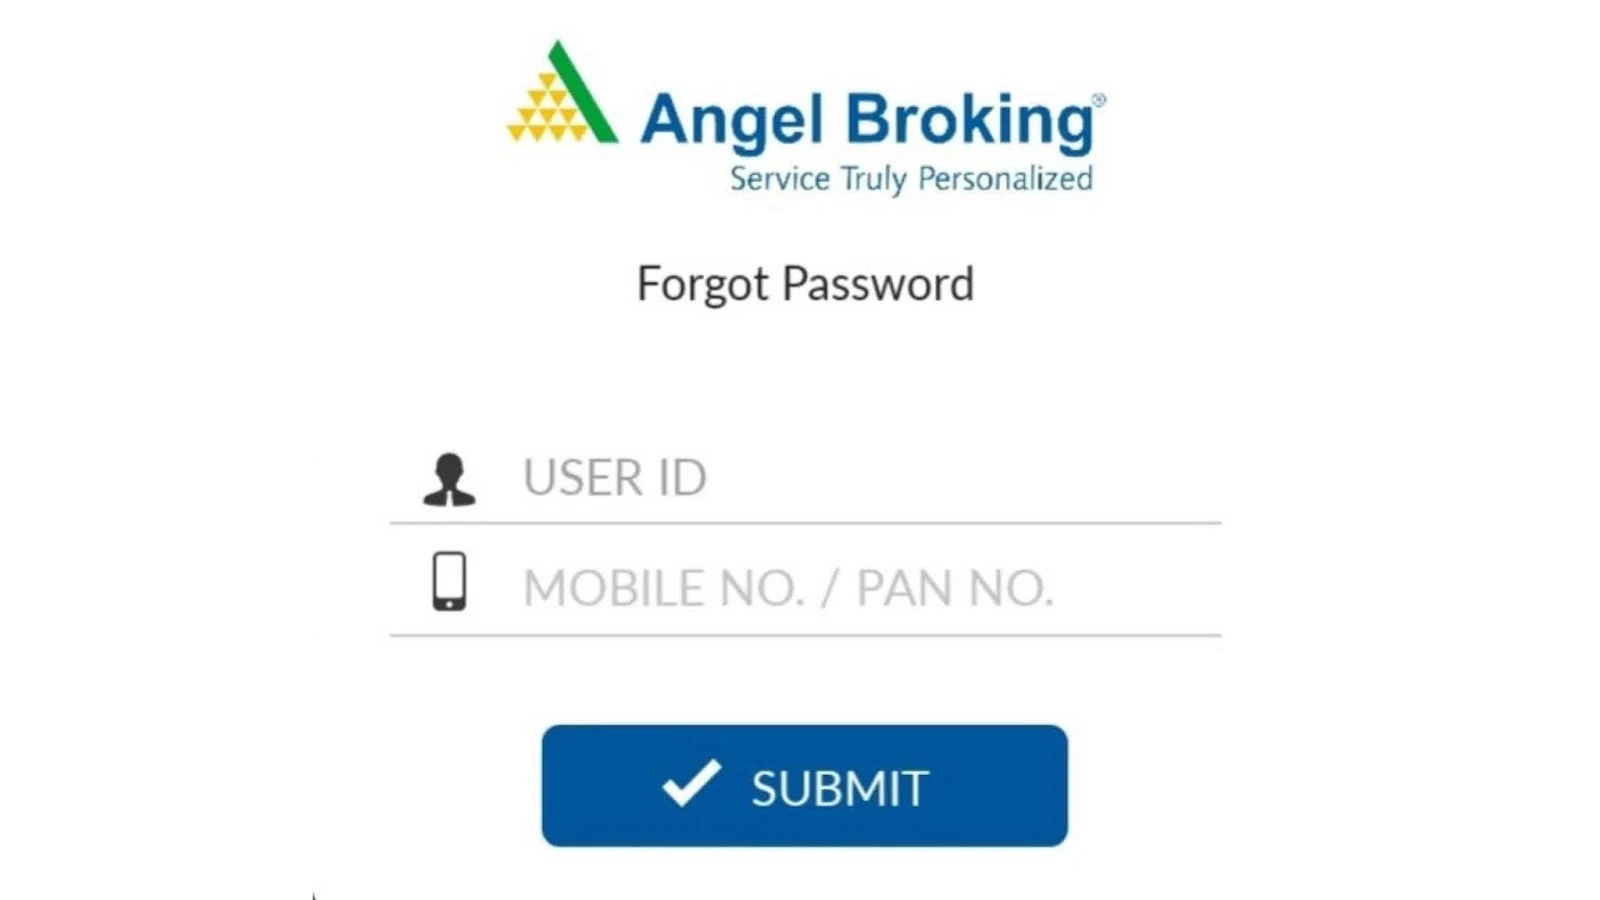 Five Way To Get Forgotten User Id And Password Of Angel Broking In 5 Minutes- Dehati Trader